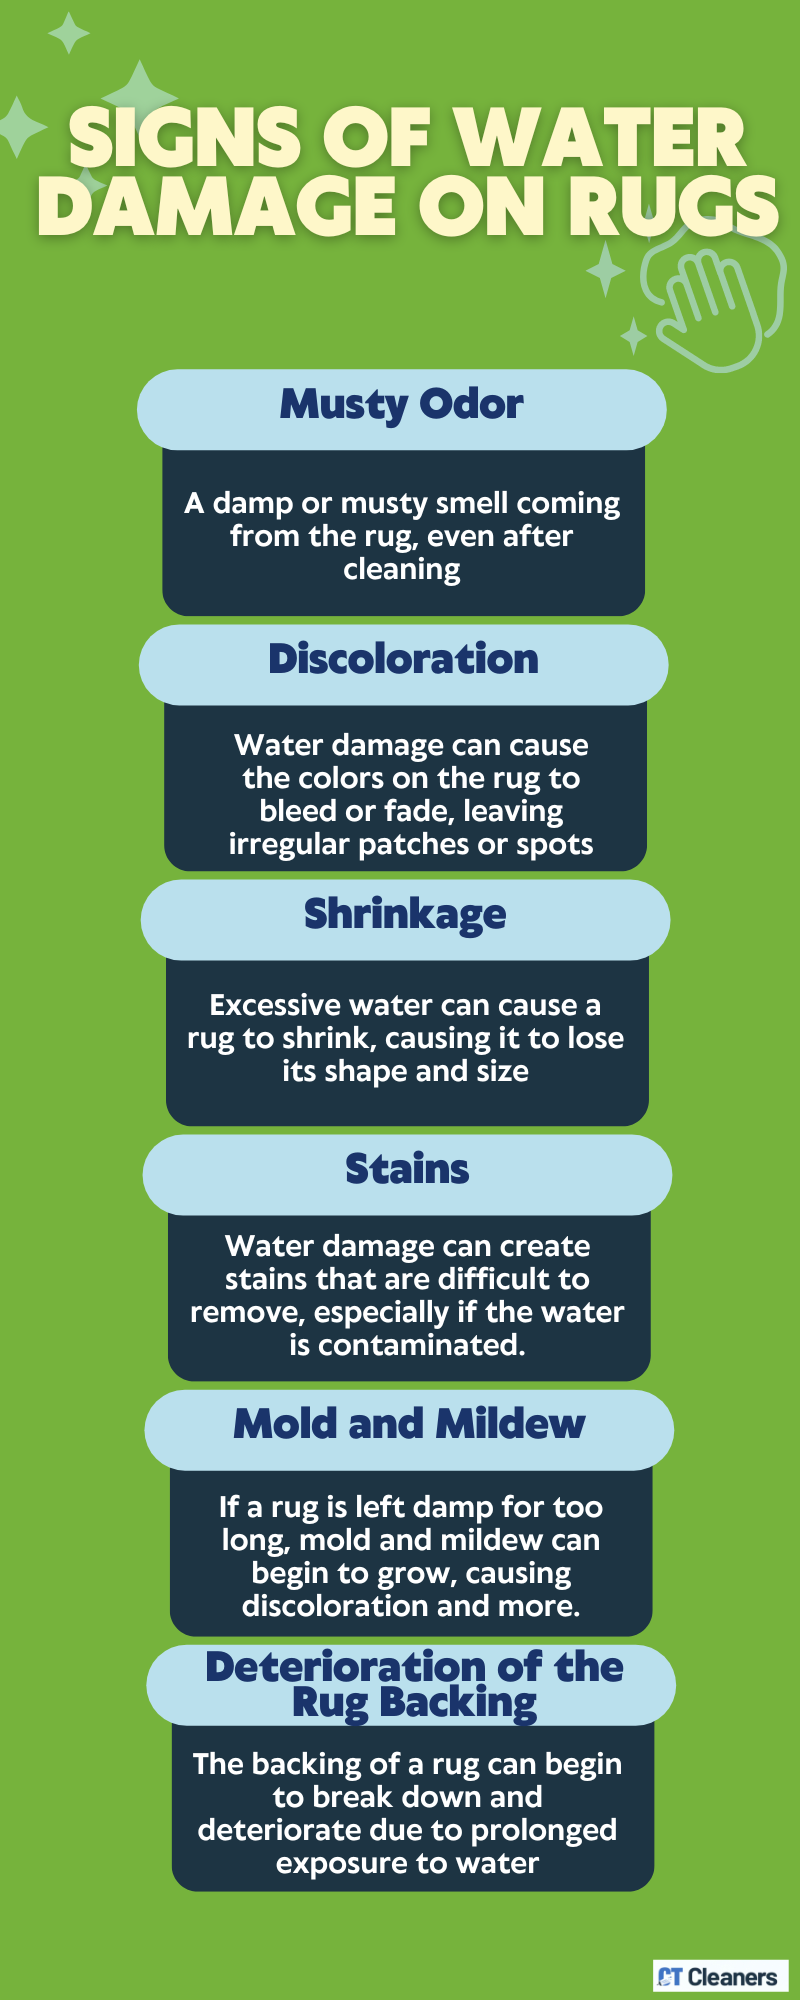 Signs of Water Damage on Rugs